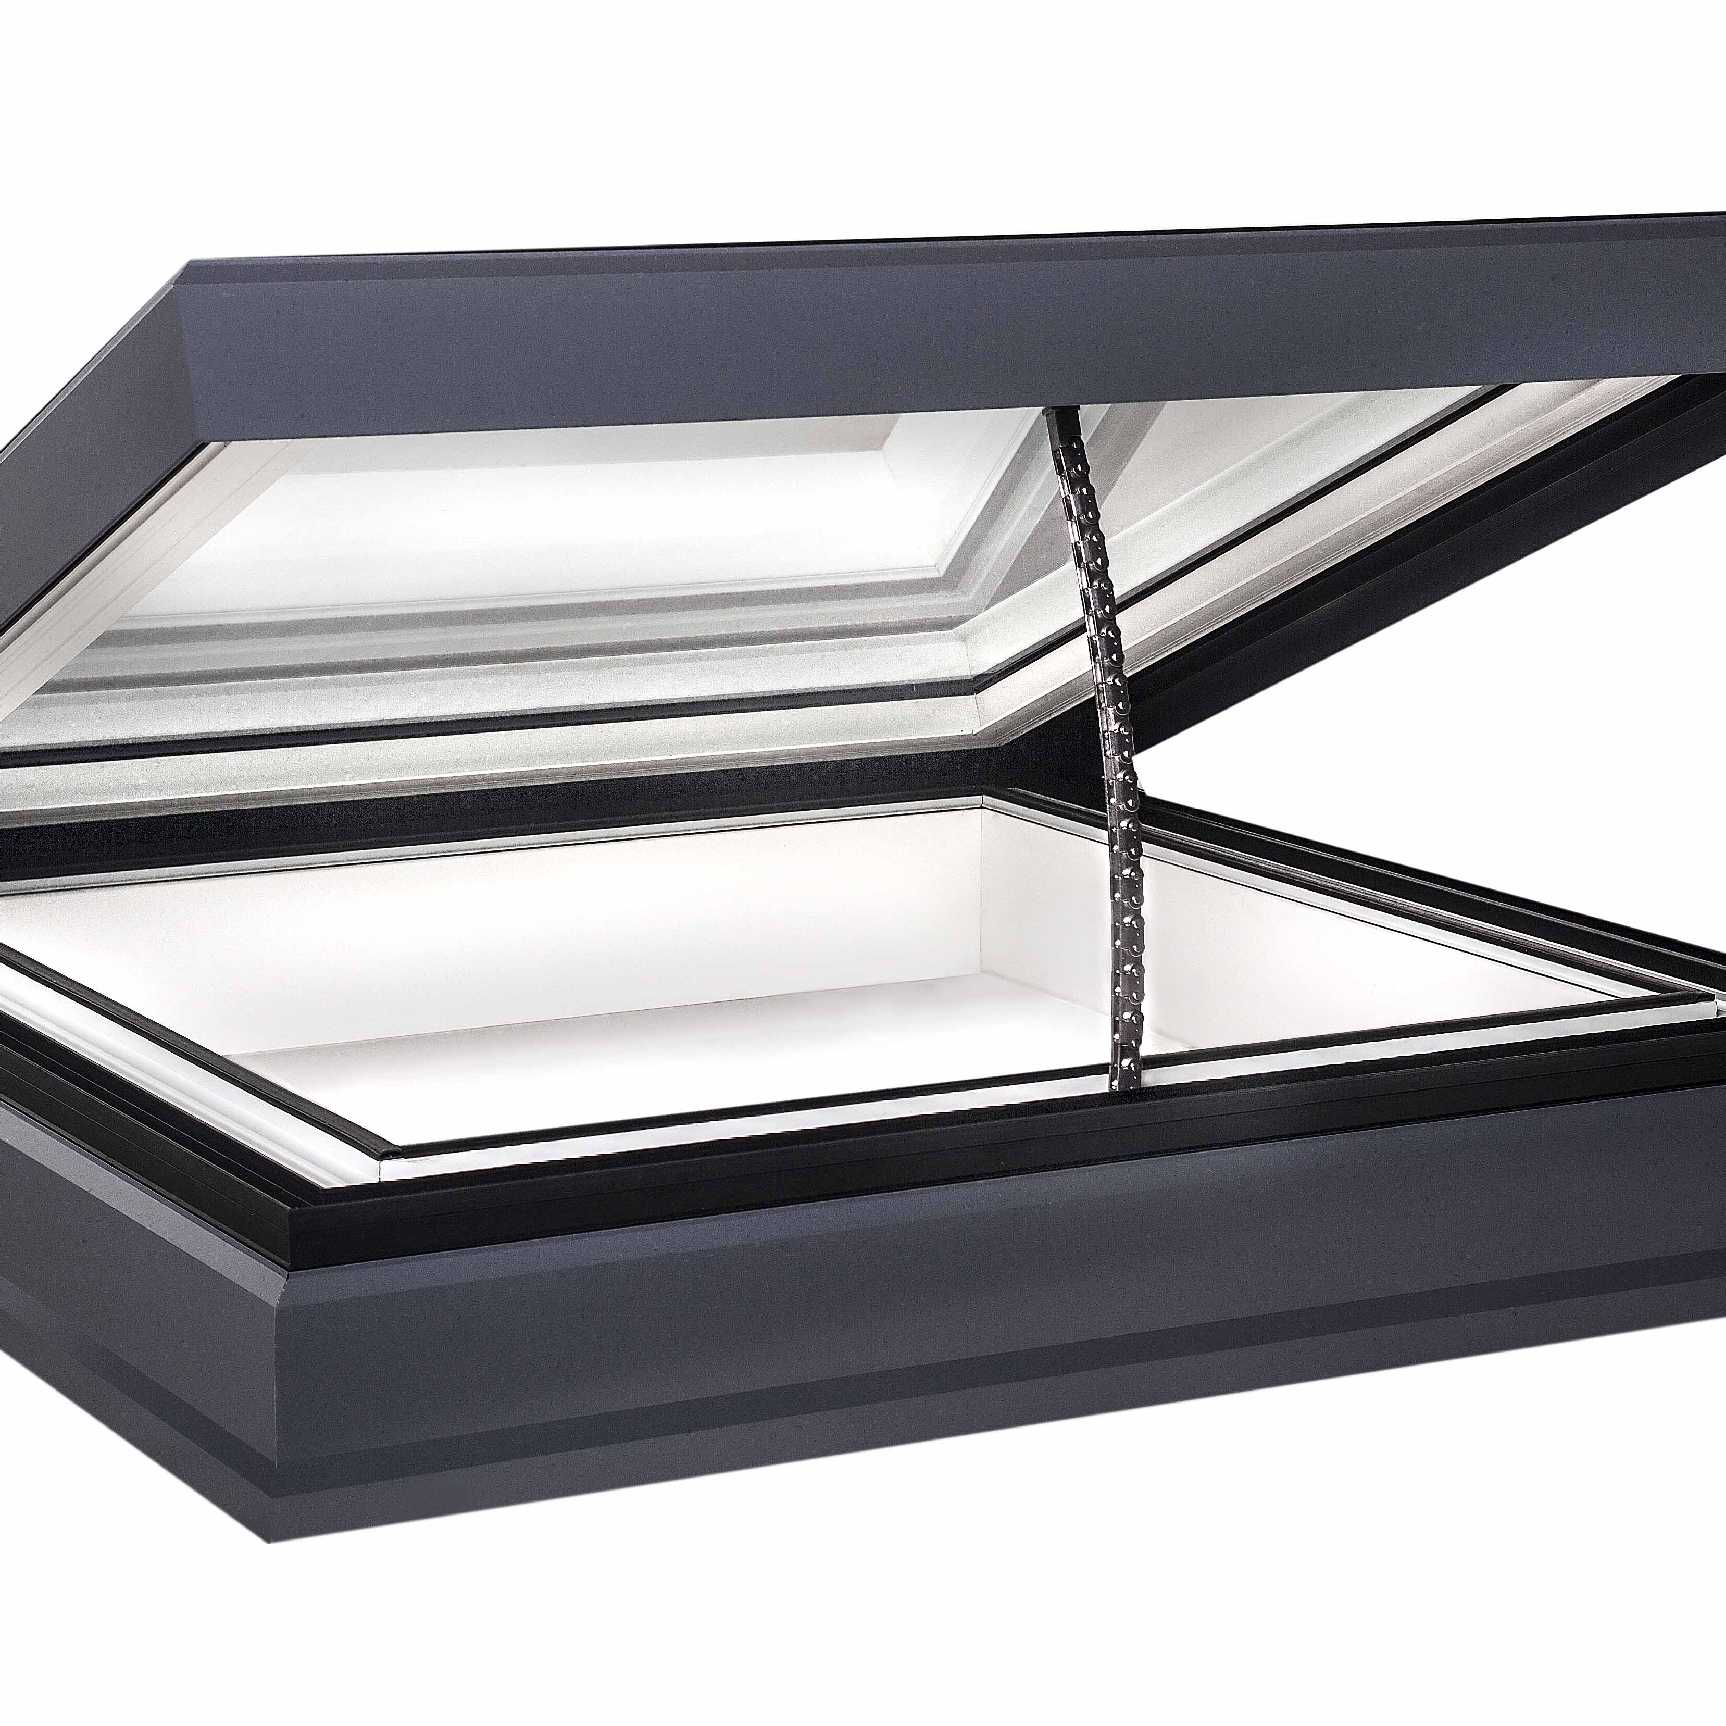 Affordable EcoGard Flat Roof light, Triple Glazed, Electric Opening, 1,000mm x 1,000mm